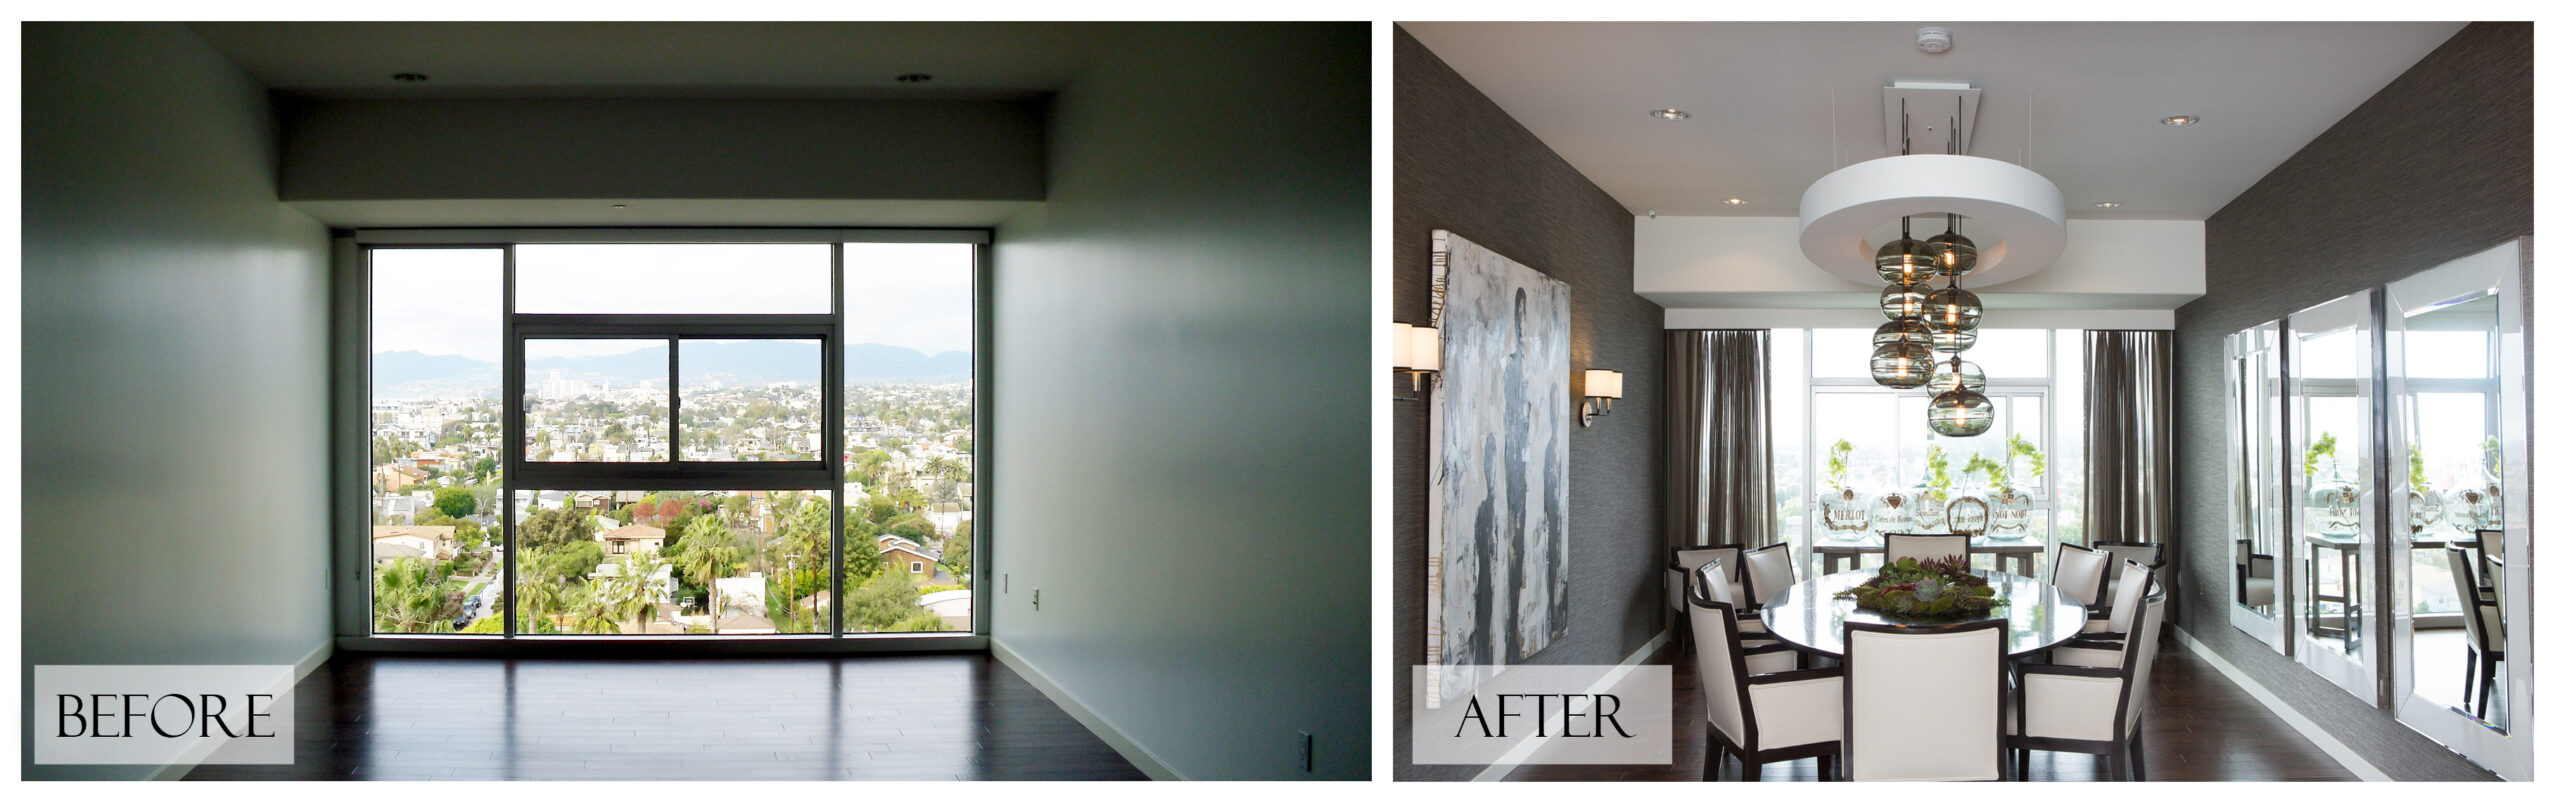 Top San Diego Interior Designer Lori Dennis Inc Before and After Dining Room